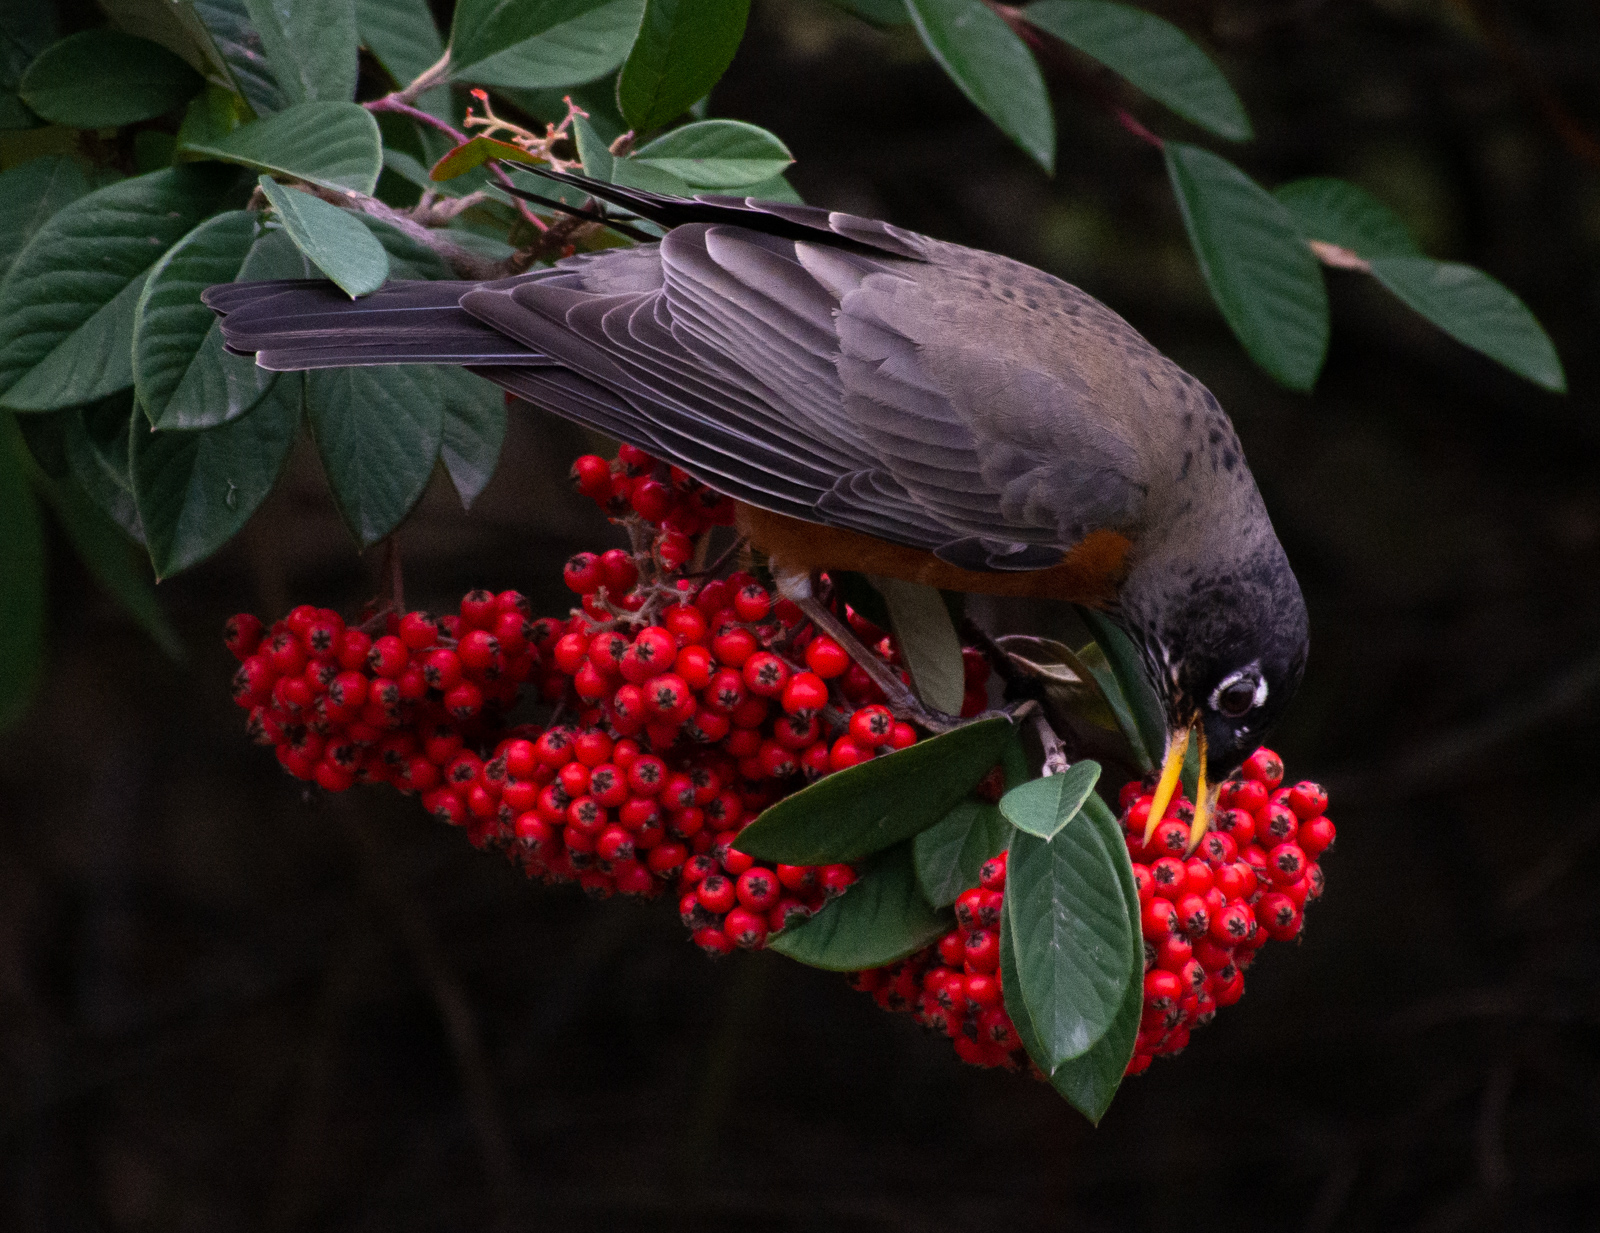 American Robin Eating Berries from Bunch